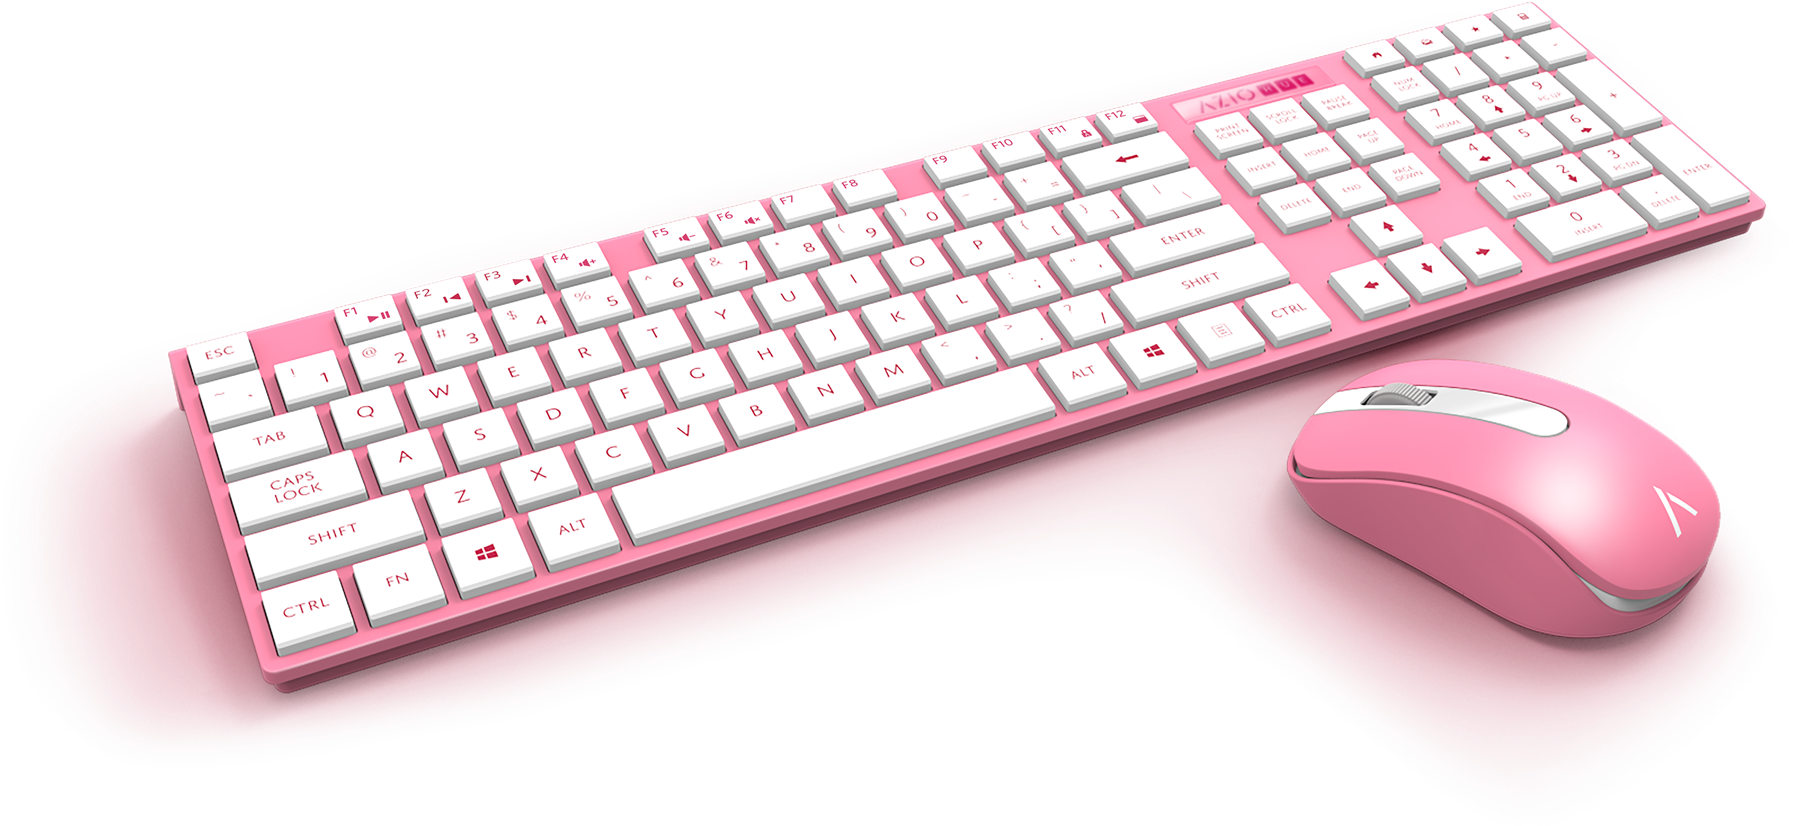 And Mouse Keyboard HQ Image Free PNG Image